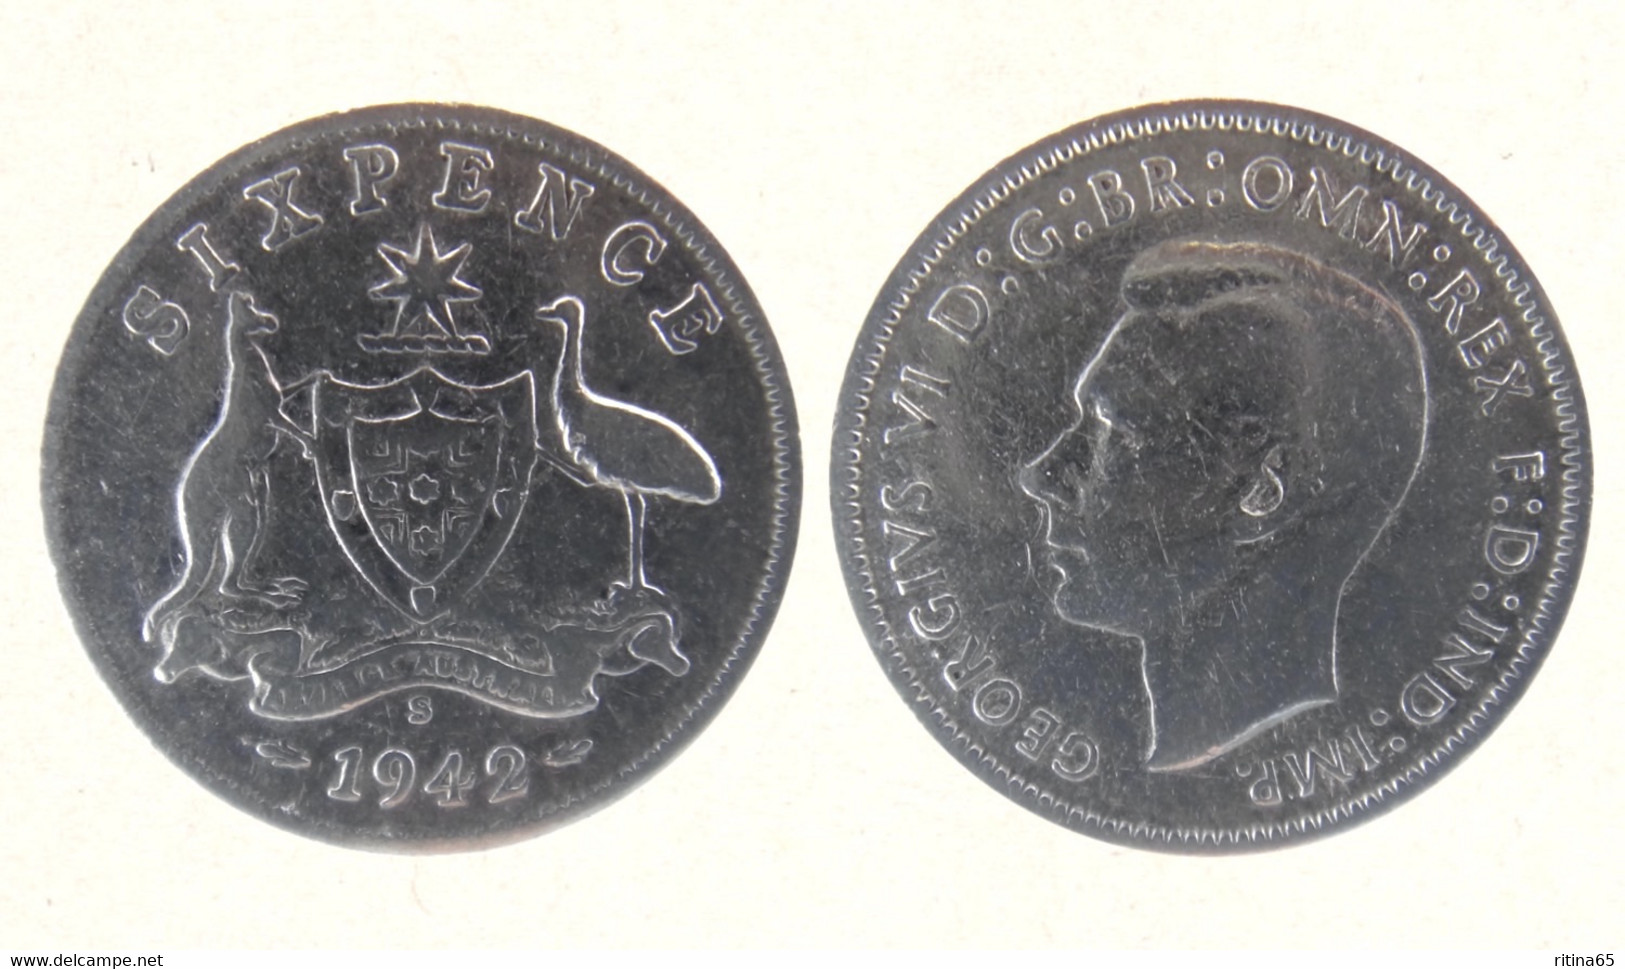 AUSTRALIA 6 PENCE 1942 IN ARGENTO - Sixpence